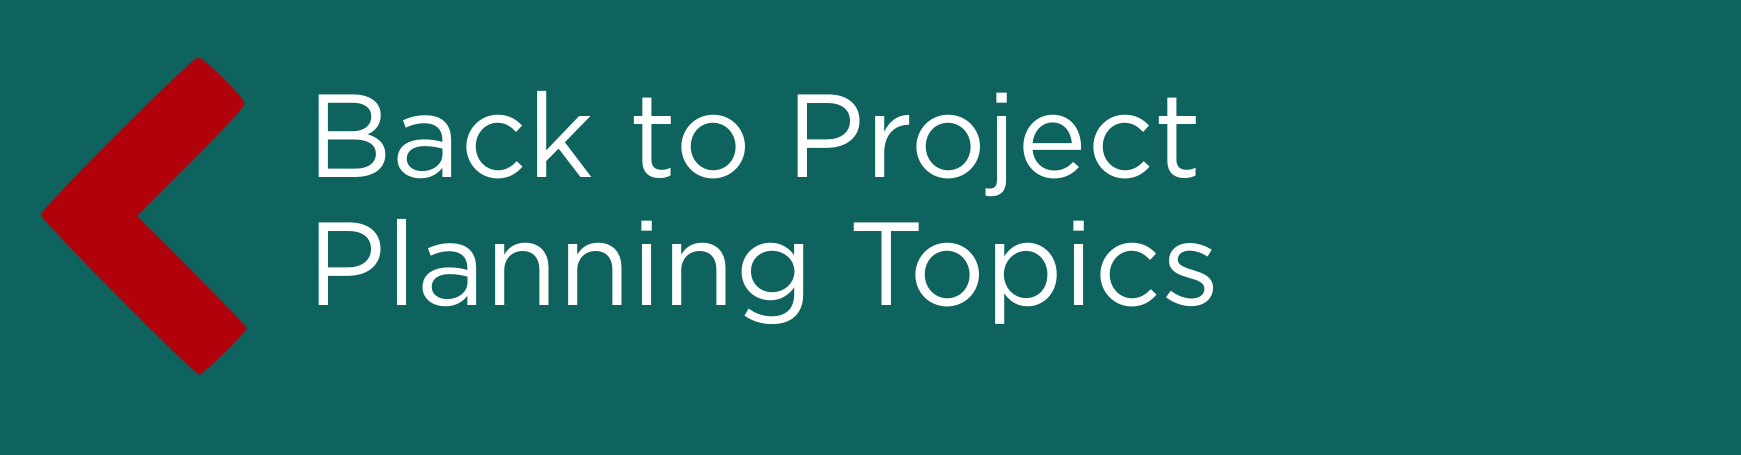 Back to Project Planning Topics button